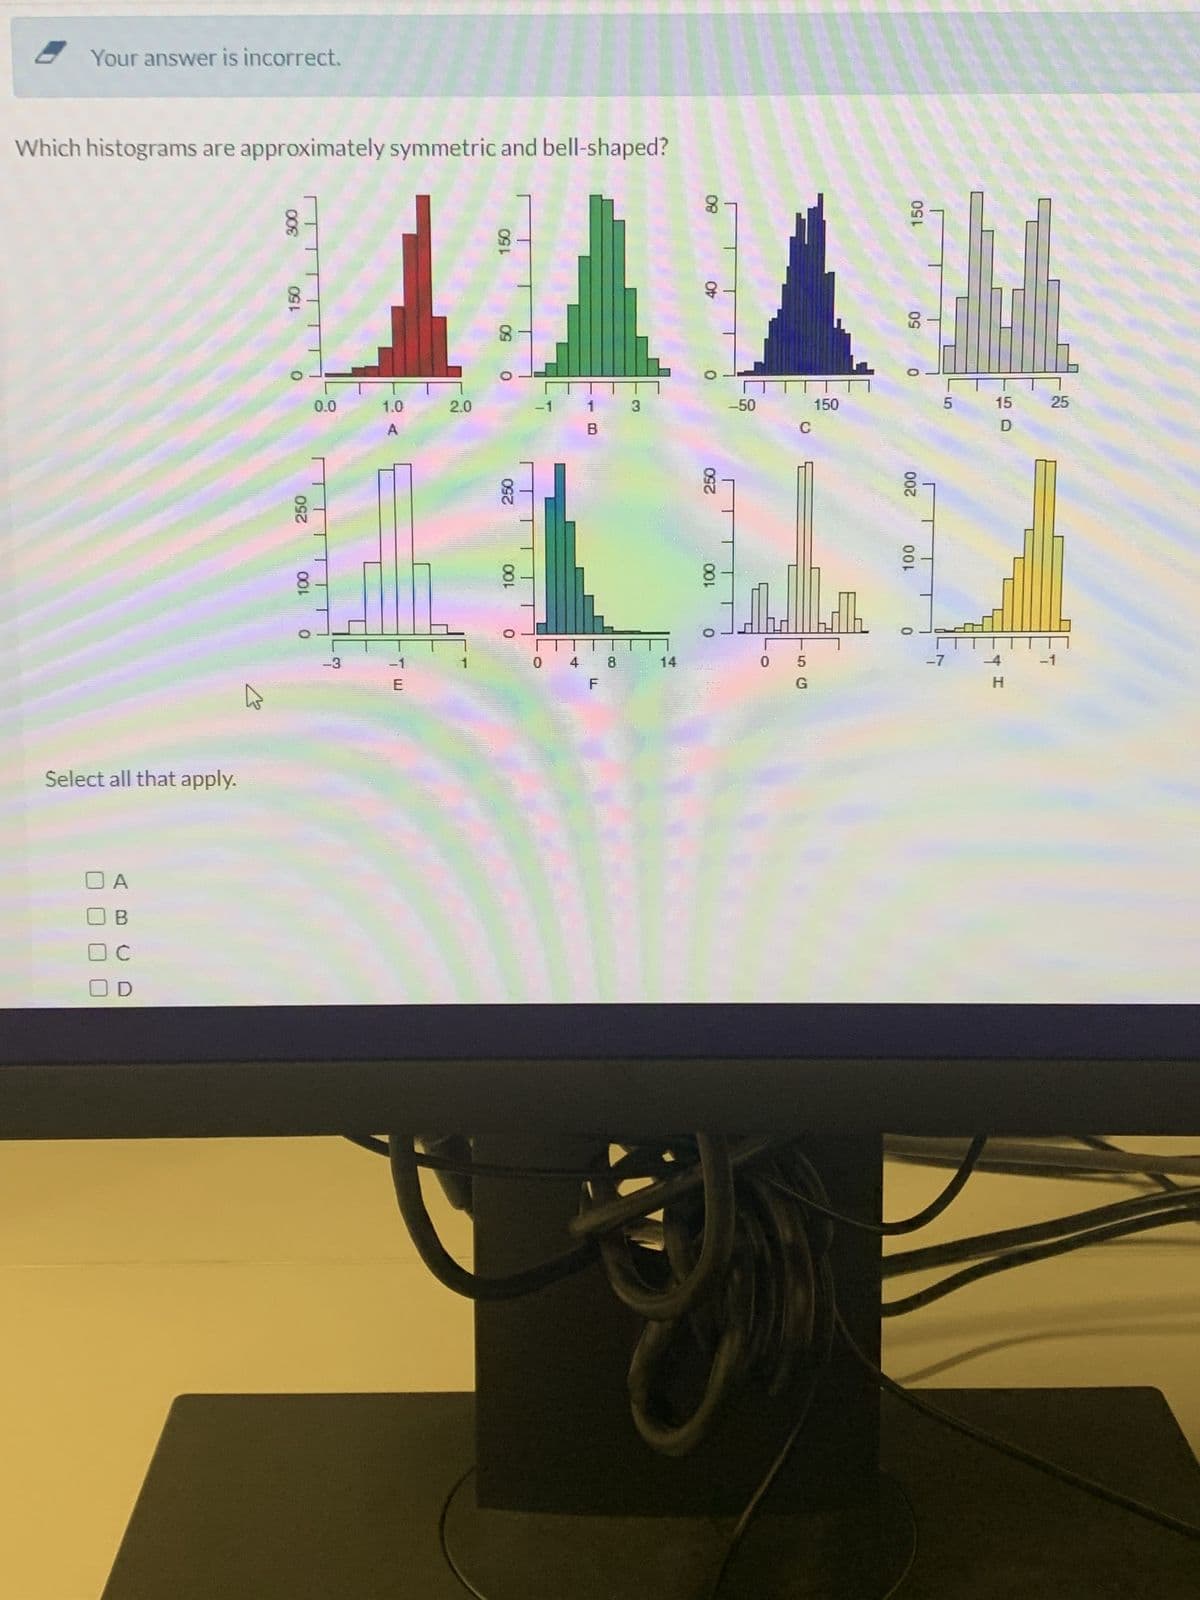 Your answer is incorrect.
Which histograms are approximately symmetric and bell-shaped?
Select all that apply.
B
с
008
150
250
100
0
0.0
-3
1
8-
1.0
A
E
2.0
150
0
250
100
0
B
10
3
U
4
14
08
OF
250
100
O
-50
C
0 5
G
150
hill
150
50
200
100
0
5
-7
15
D
--4
H
25
T